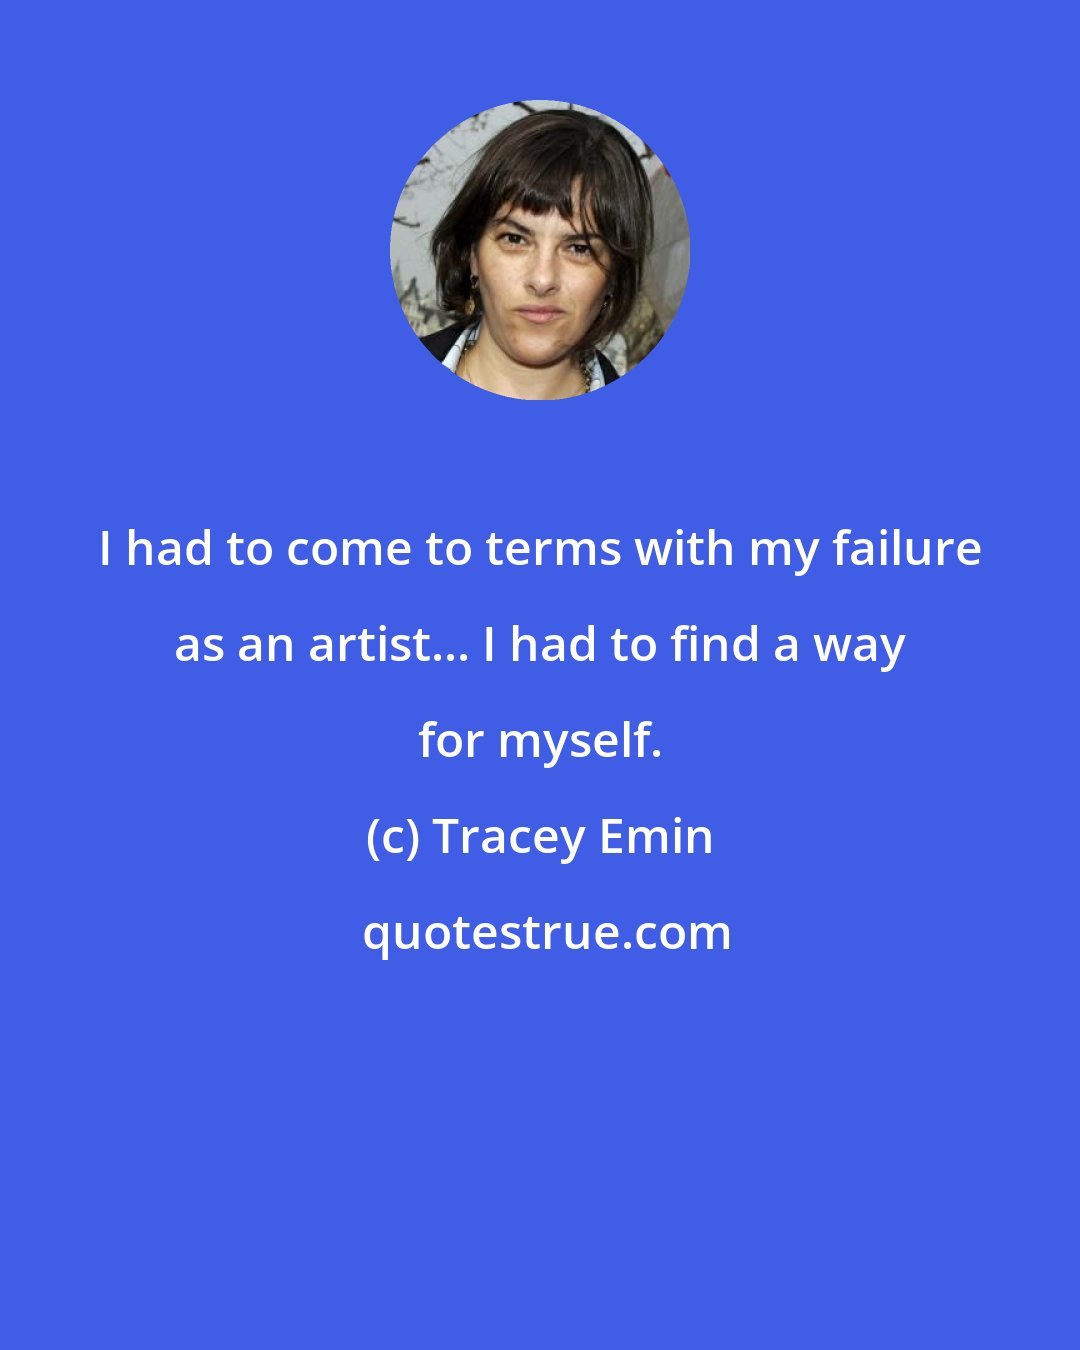 Tracey Emin: I had to come to terms with my failure as an artist... I had to find a way for myself.